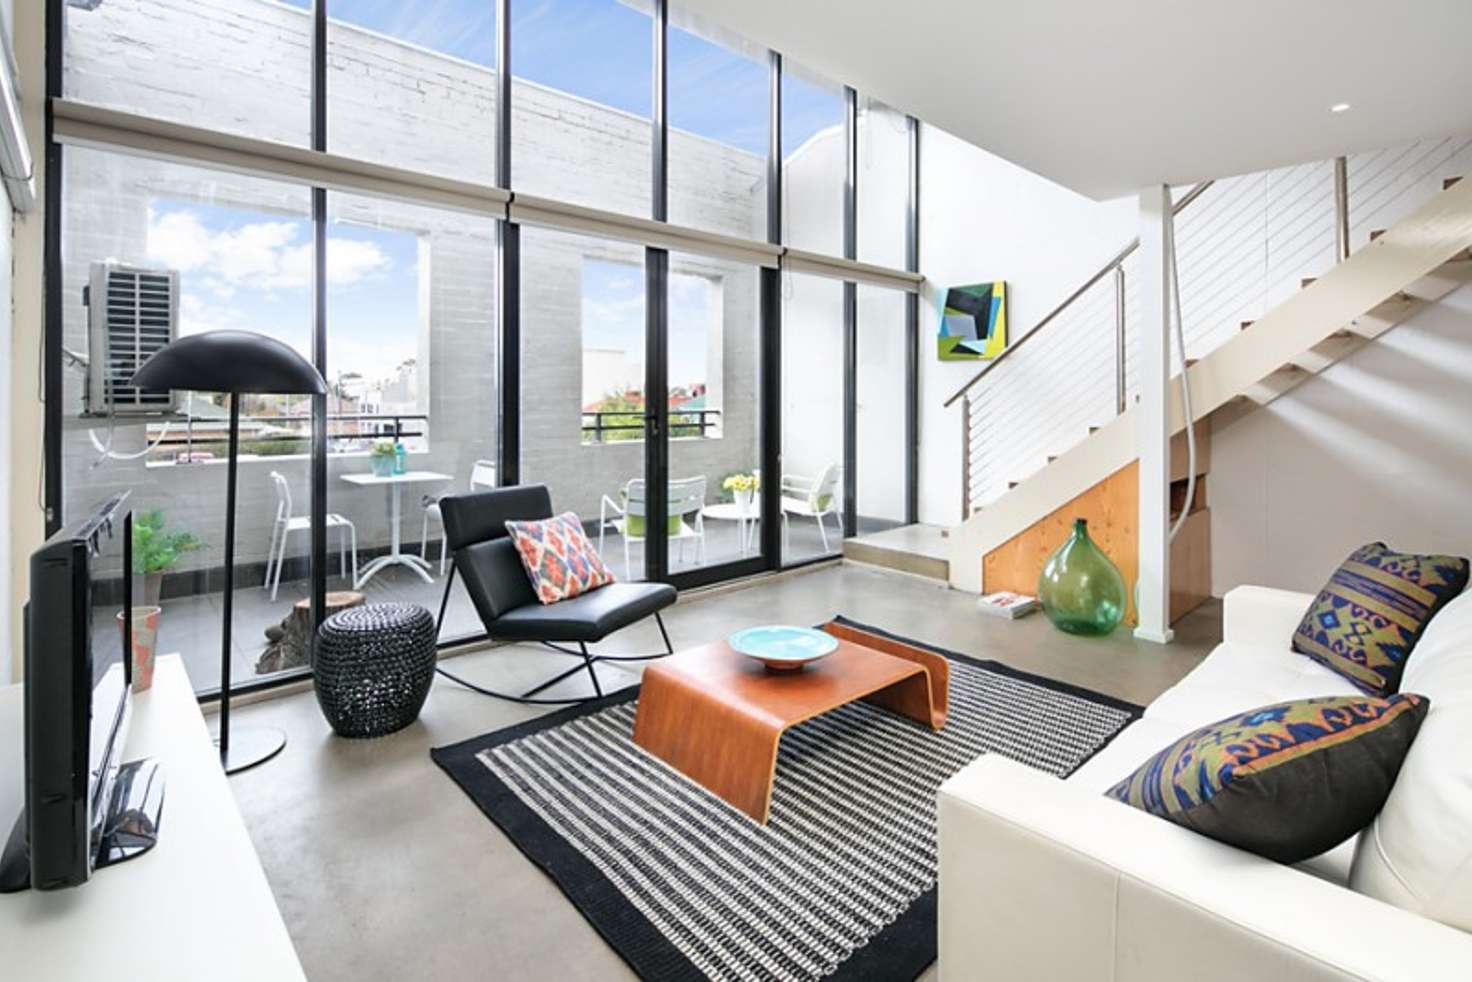 Main view of Homely apartment listing, 122/1-3 Dods St, Brunswick VIC 3056